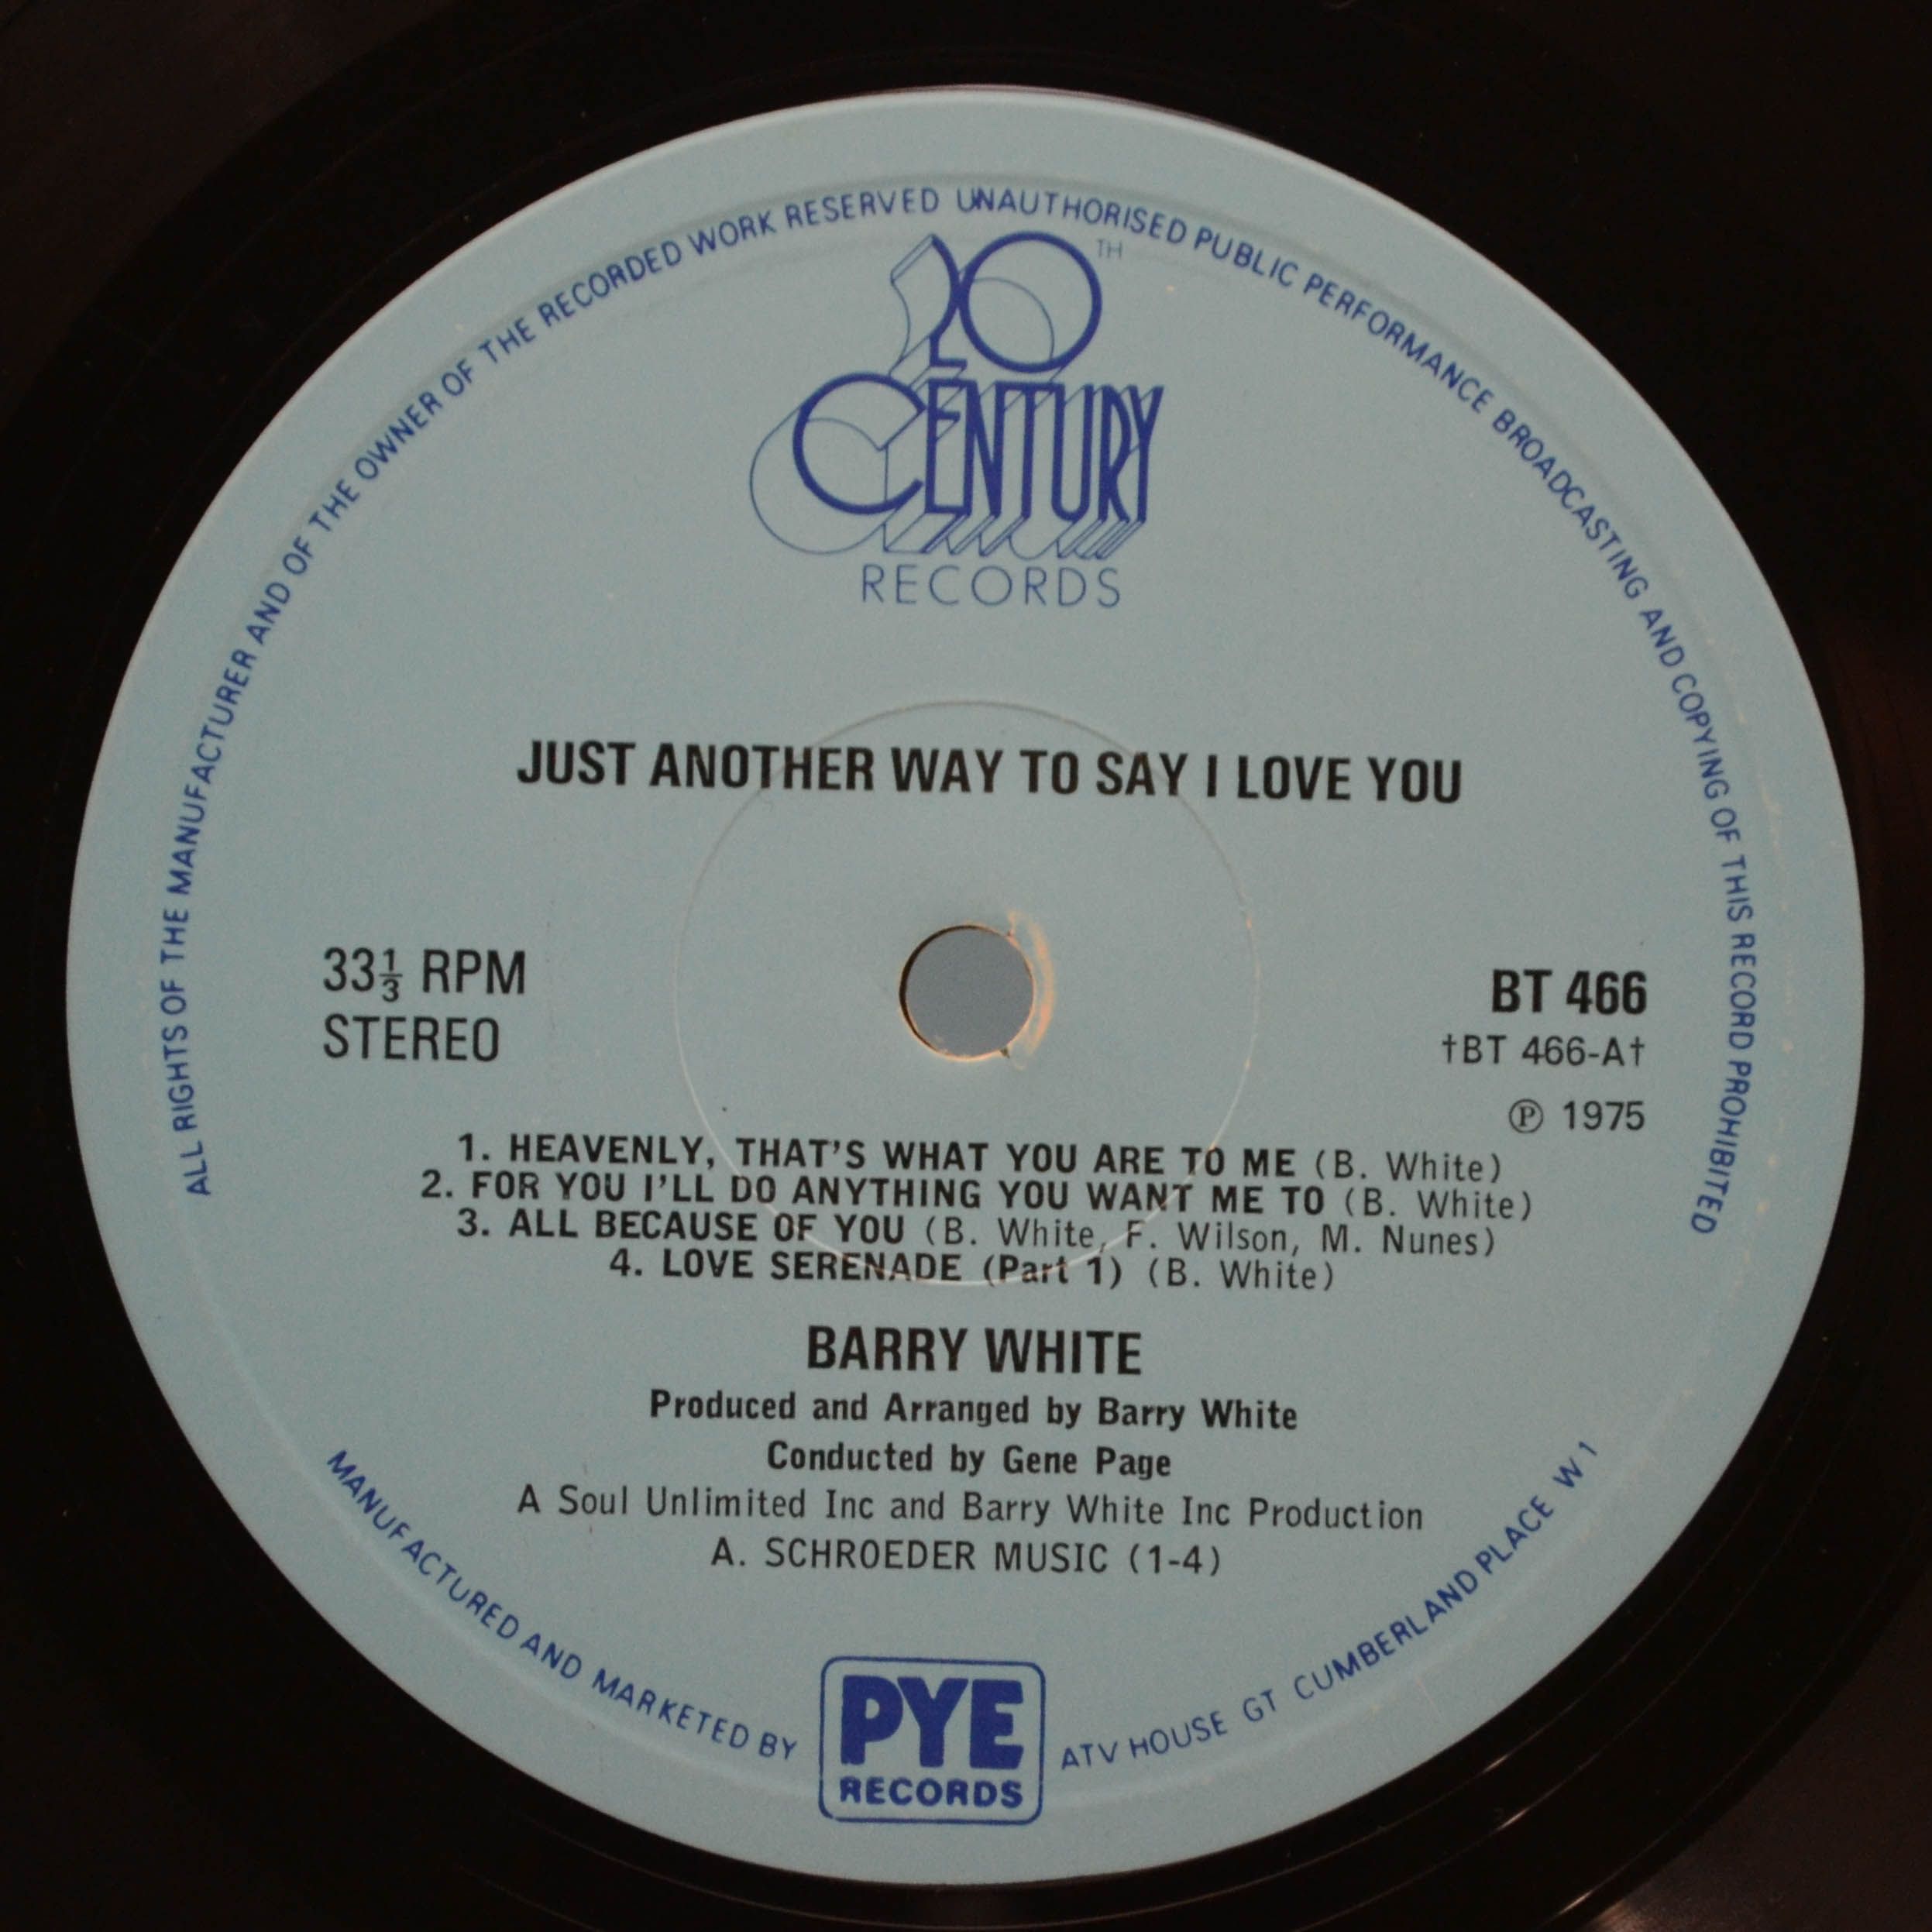 Barry White — Just Another Way To Say I Love You (UK), 1975